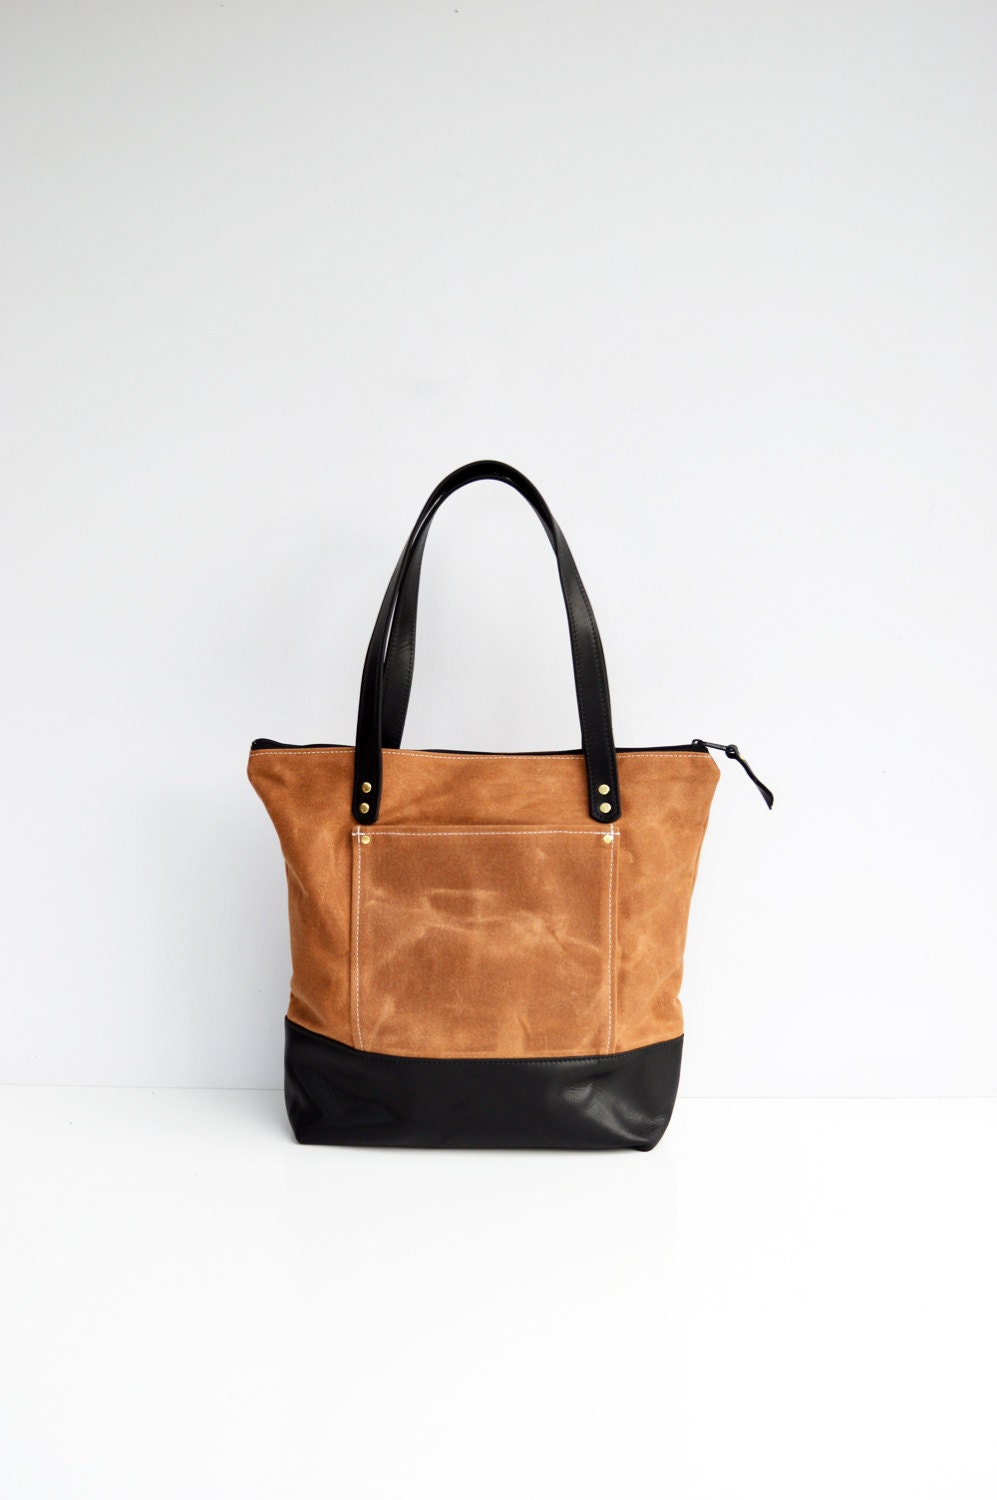 Tan waxed canvas and leather zipper pocket tote bag / Work bag